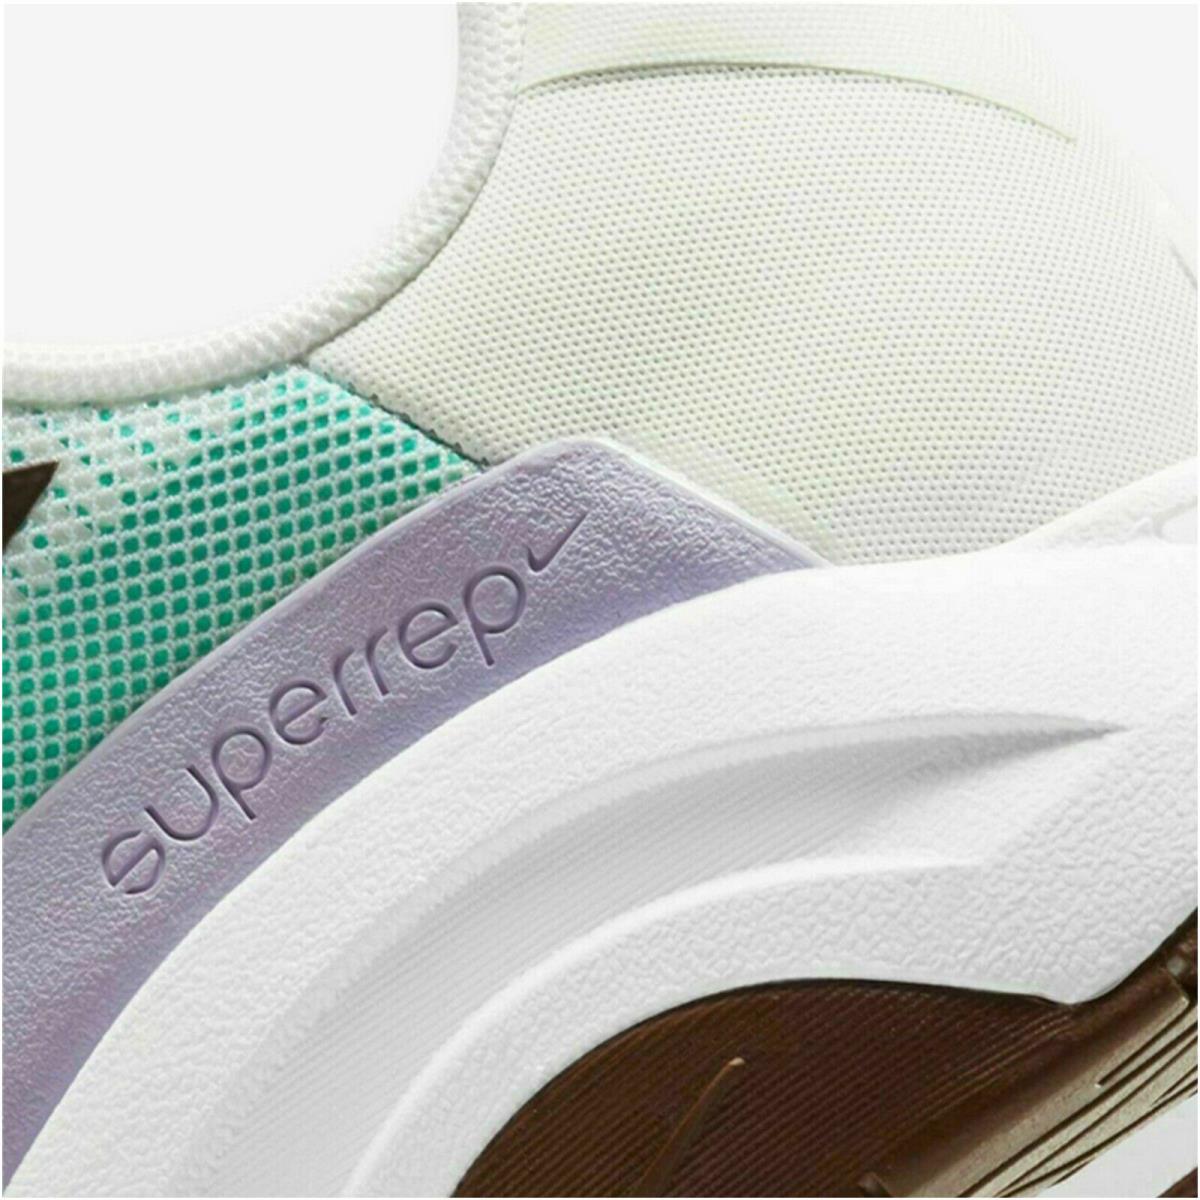 Nike shoes ZOOMX SUPERREP - WHITE/BRONZE ECLIPSE 7